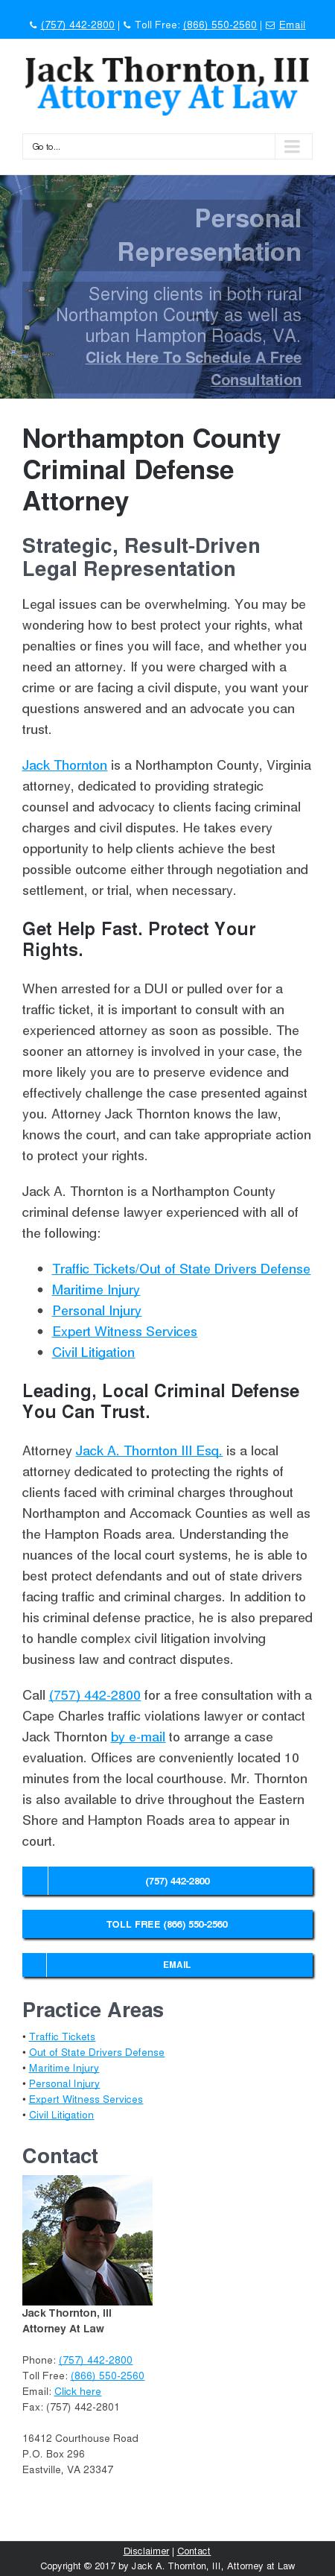 Jack A. Thornton, III, Attorney at Law - Cape Charles VA Lawyers